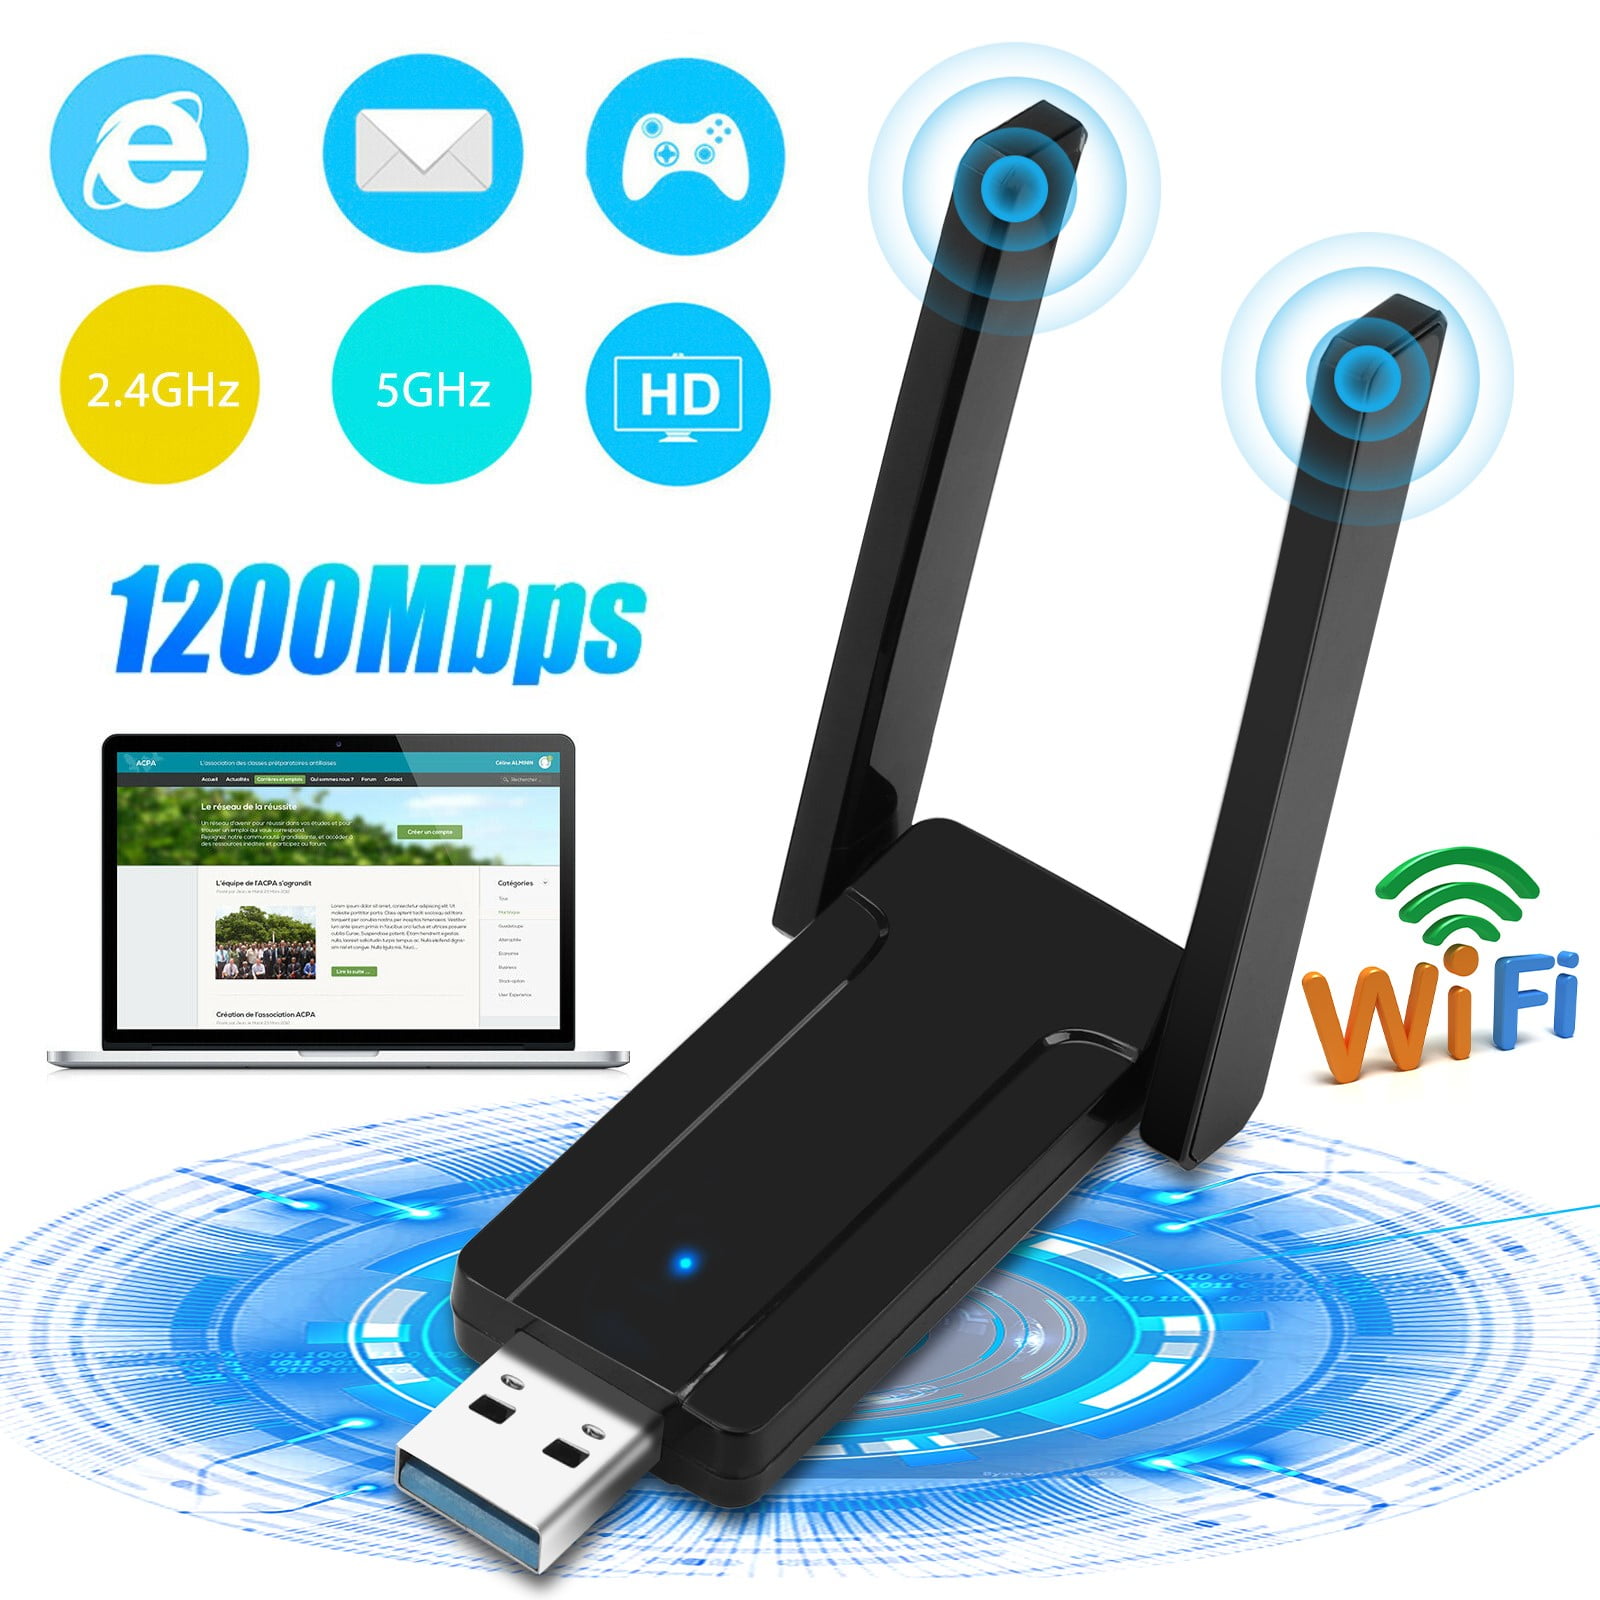 Regenerativ forvrængning notifikation EEEkit USB WiFi Adapter for PC 1200Mbps Dual Band 2.4GHz/5GHz Fast USB3.0  High Gain 5dBi Antenna 802.11ac WiFi Dongle Wireless Network Adapter for  Desktop Laptop Supports Windows Mac Linux - Walmart.com